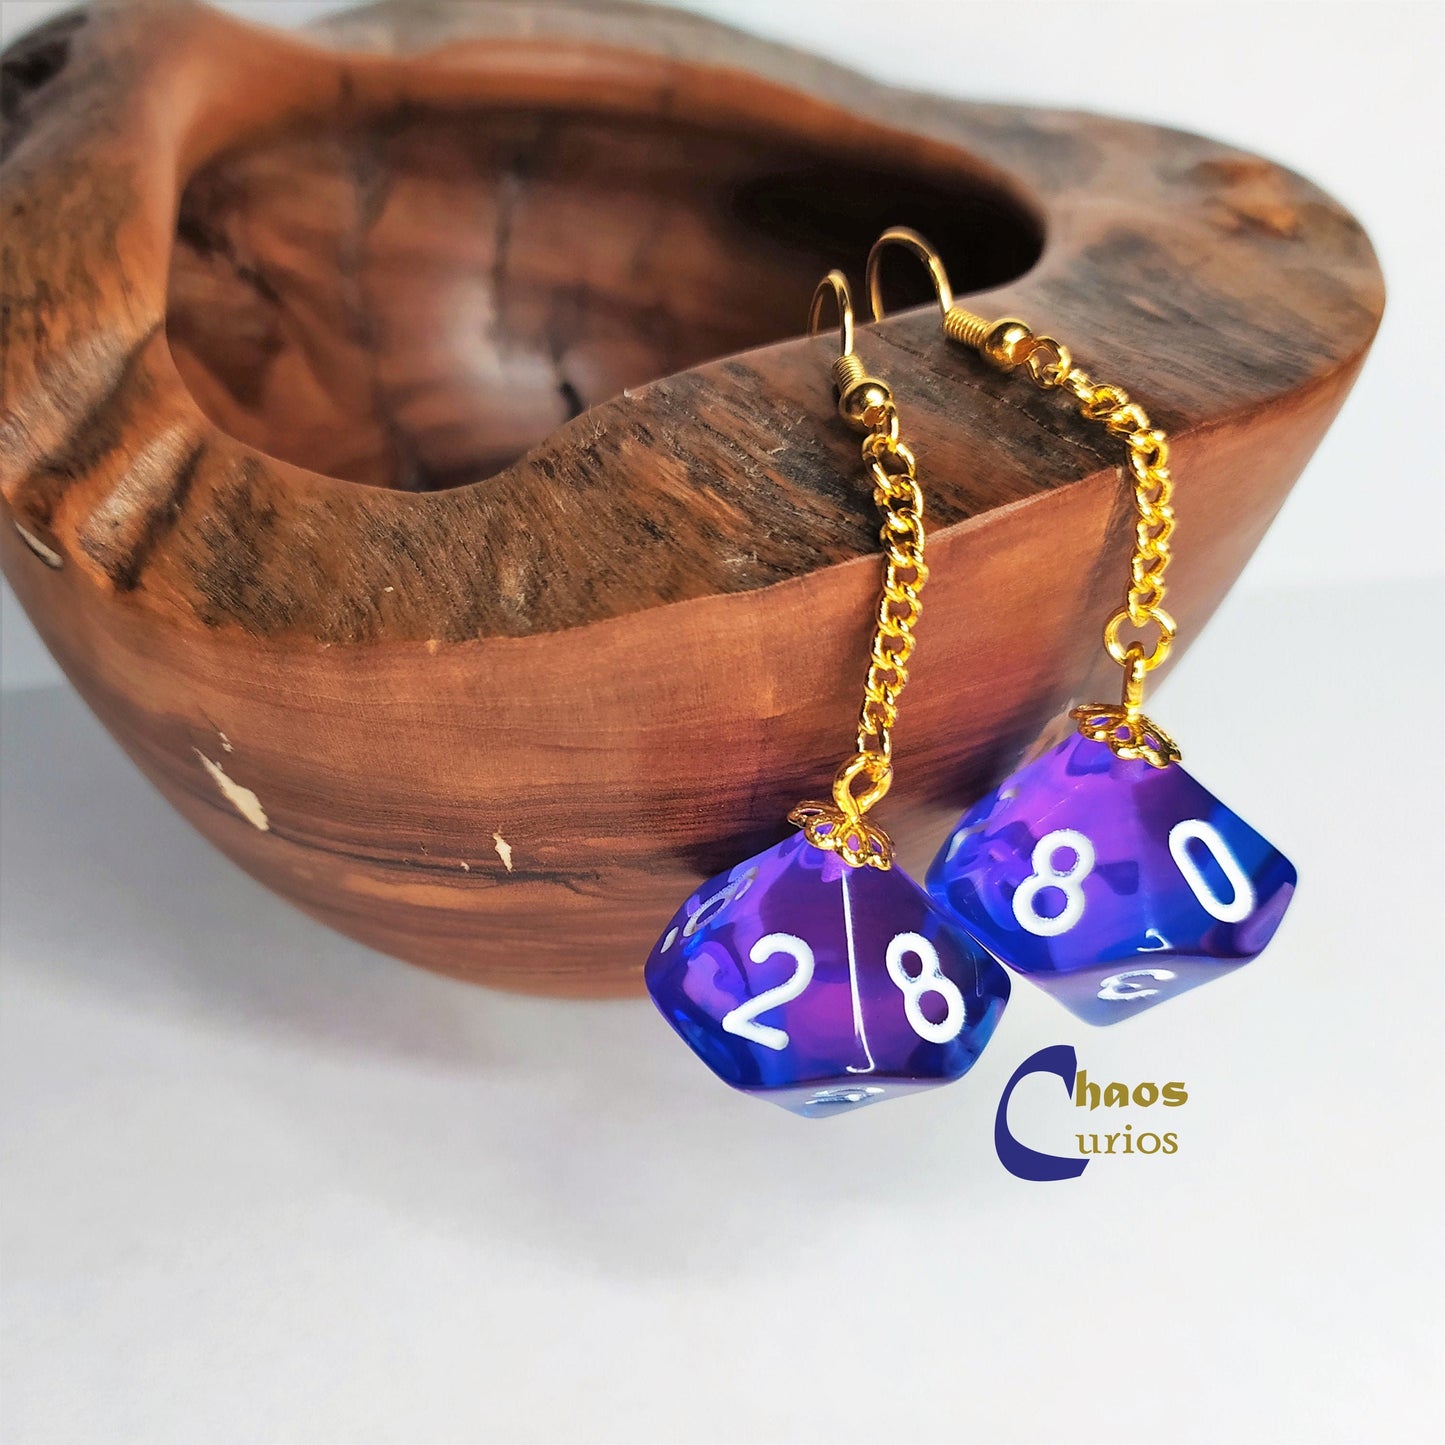 D10/% Dice Earrings, Gold Finishing, Dnd Swag